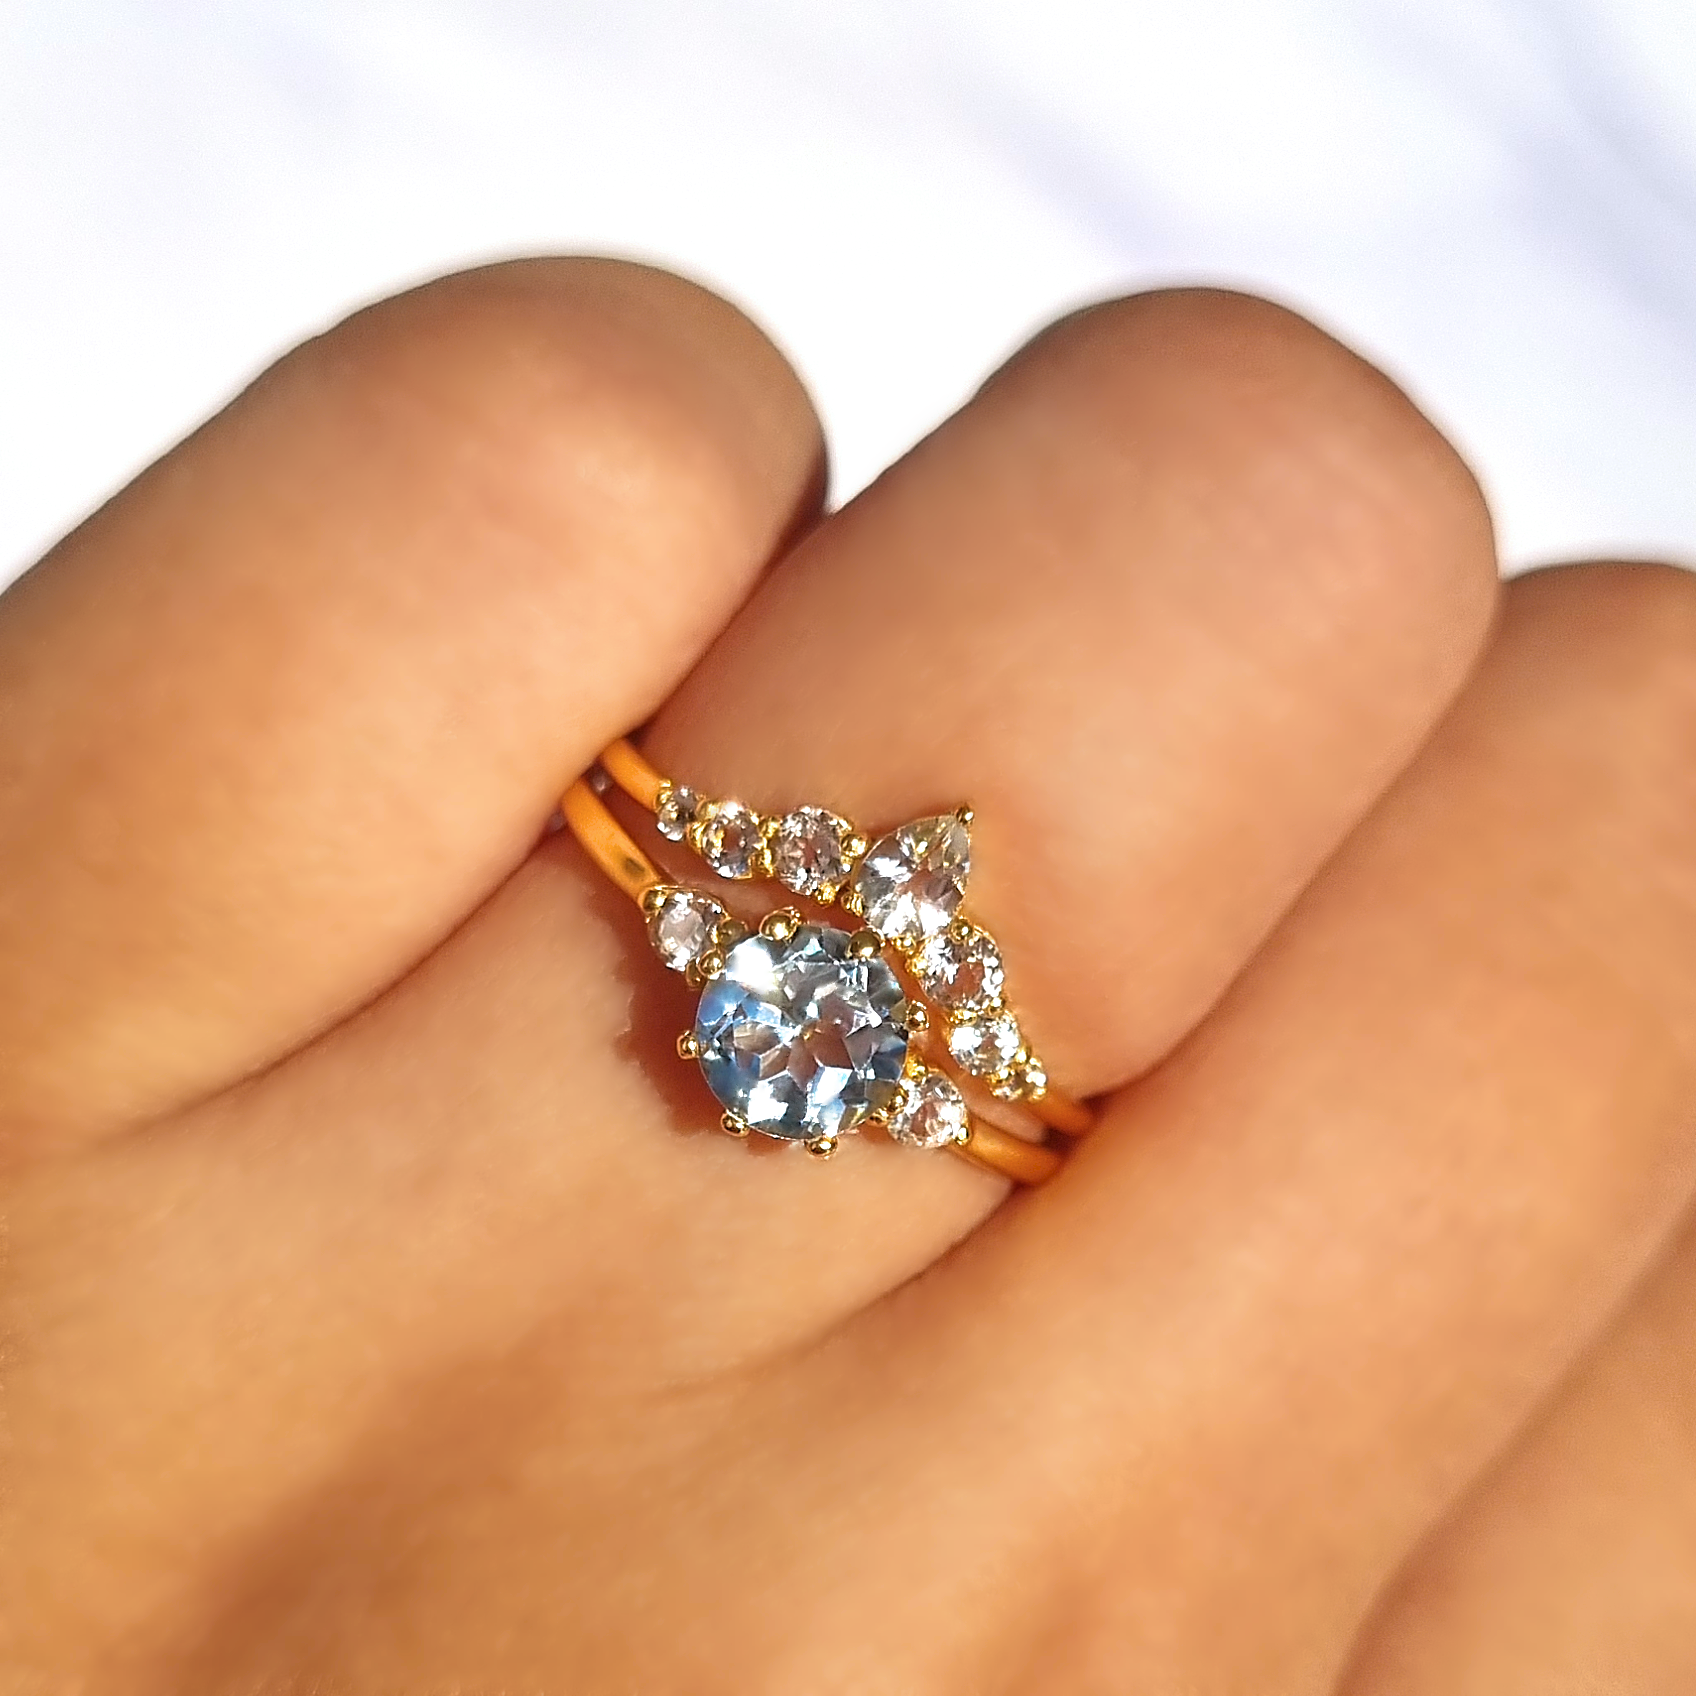 Round cut sky blue topaz and white topaz three stone engagement and wedding ring stack in 18K gold vermeil